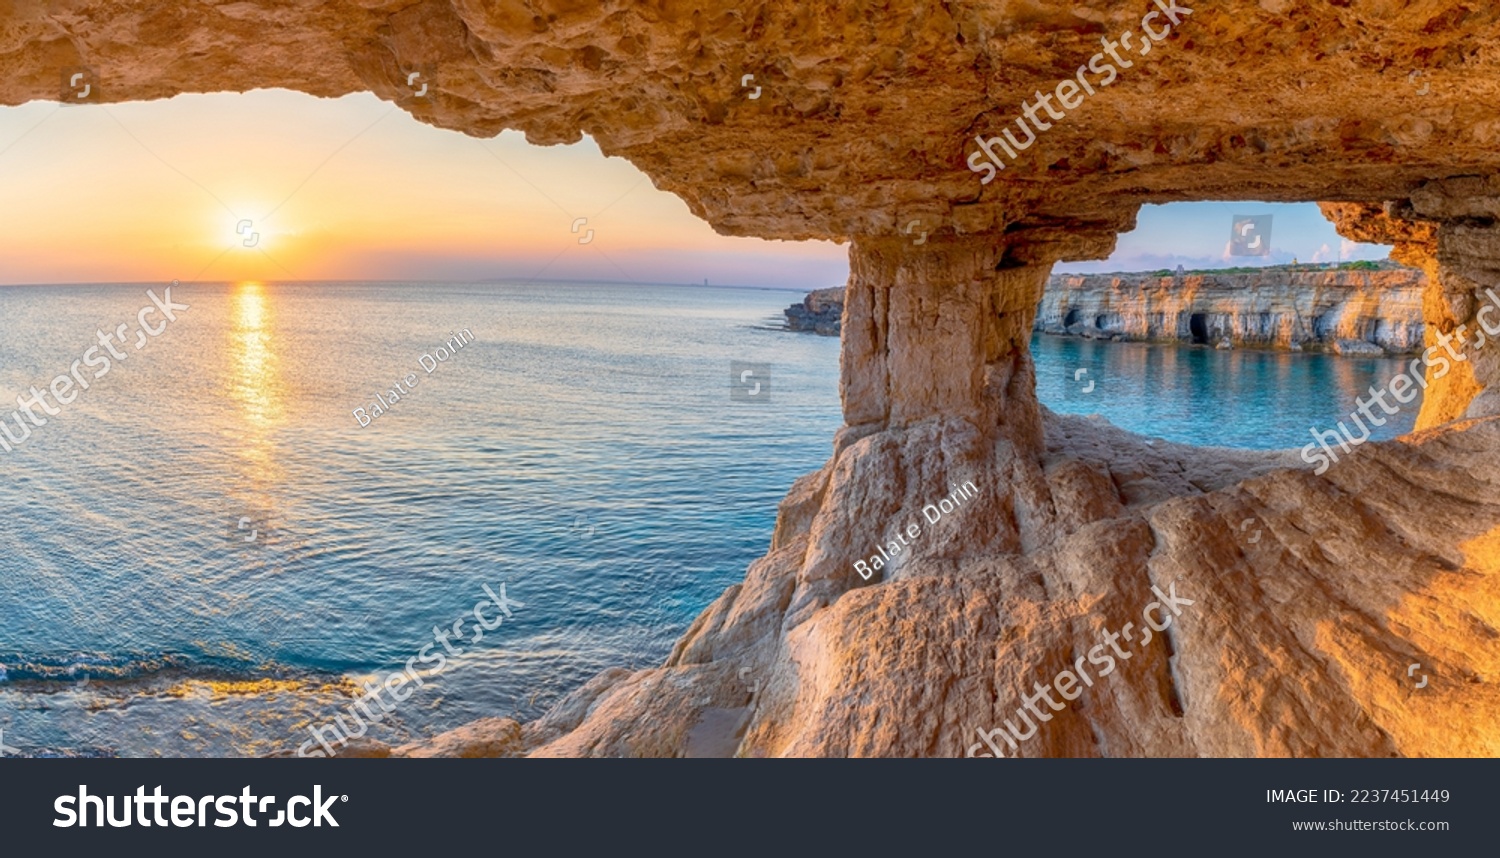 Landscape with sea cave at sunset, Ayia Napa, Cyprus #2237451449